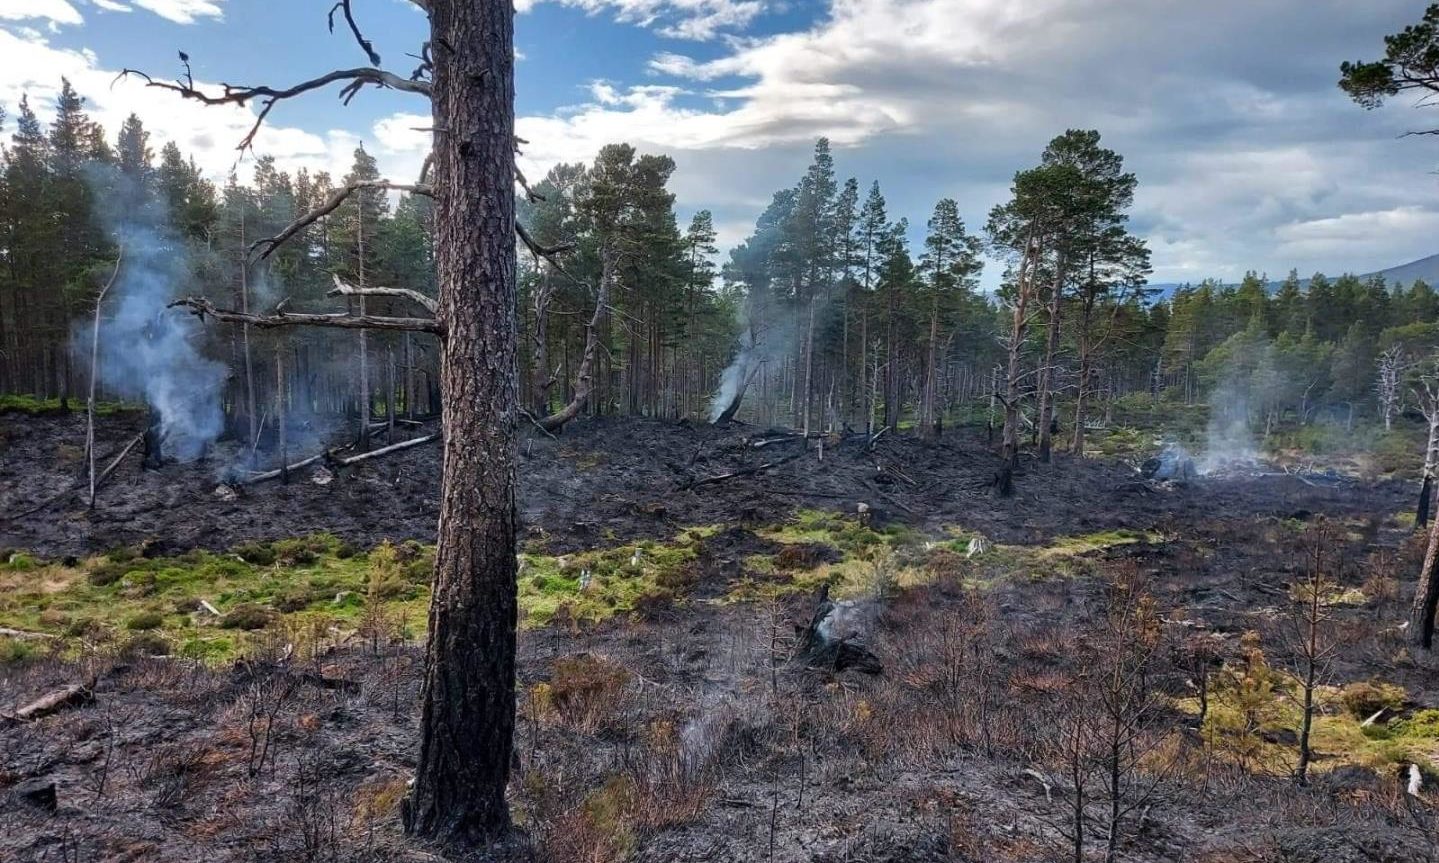 Wildfire damage in woodland near Loch Morlich, after a preventable fire raged out of control over June 5 and 6, 2021.